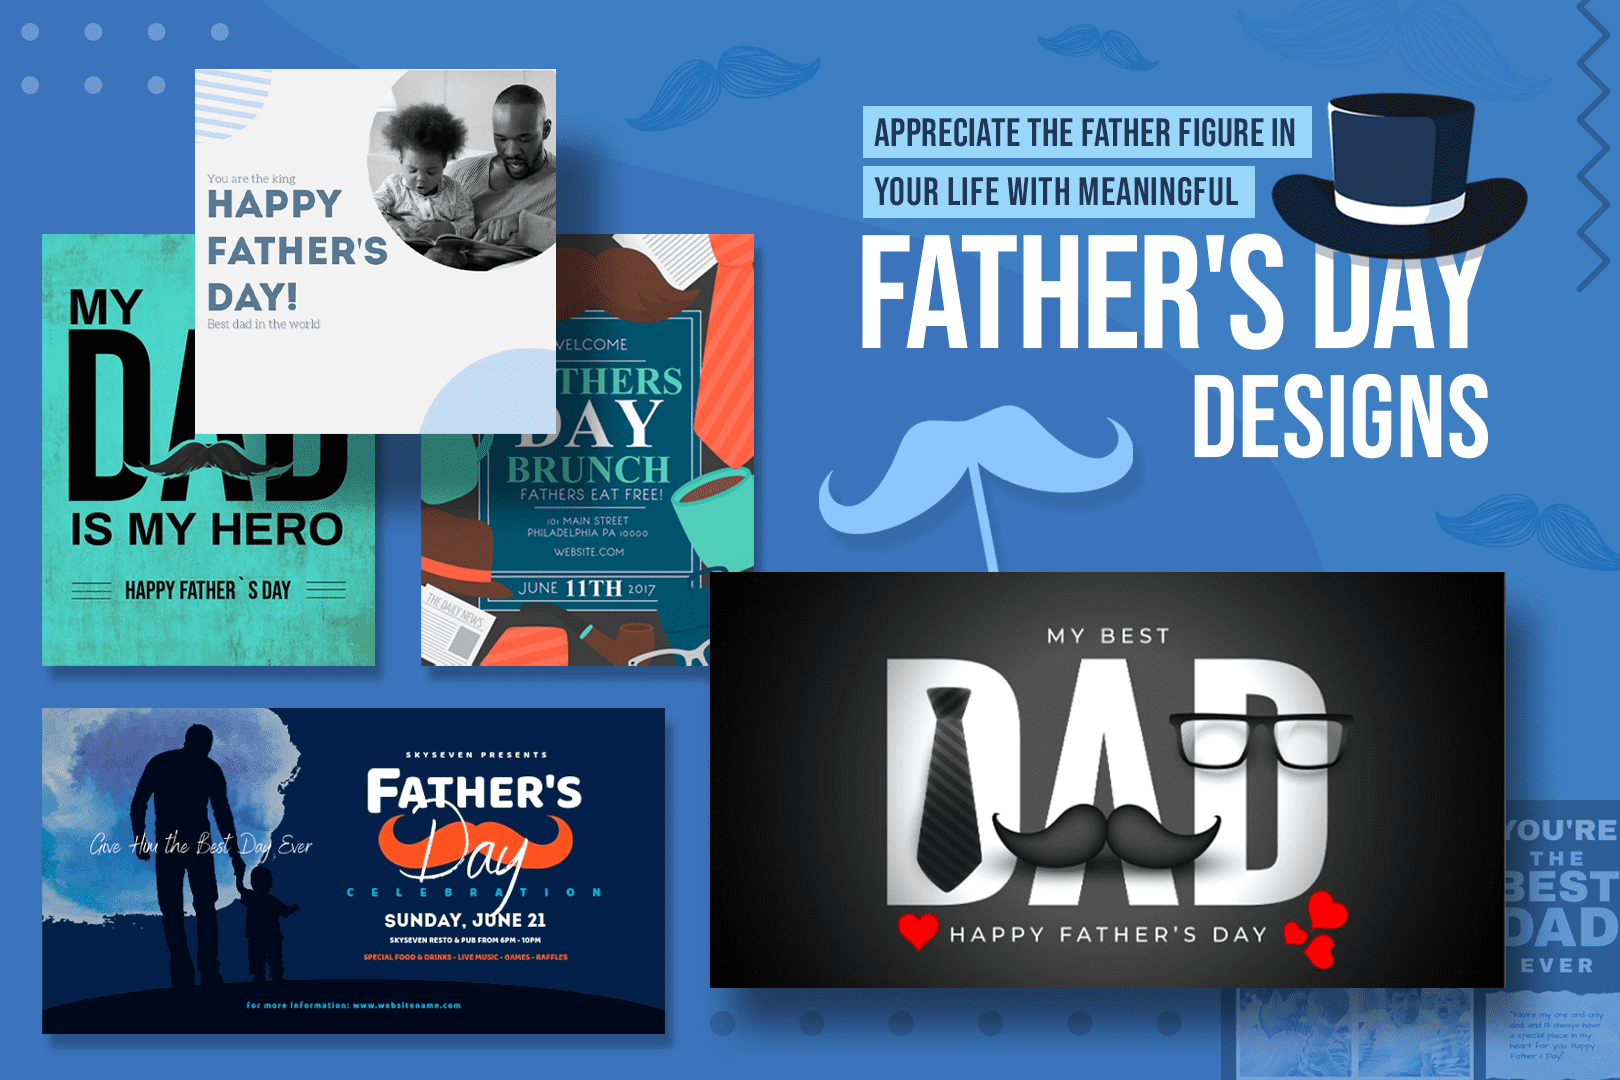 Father’s Day posters